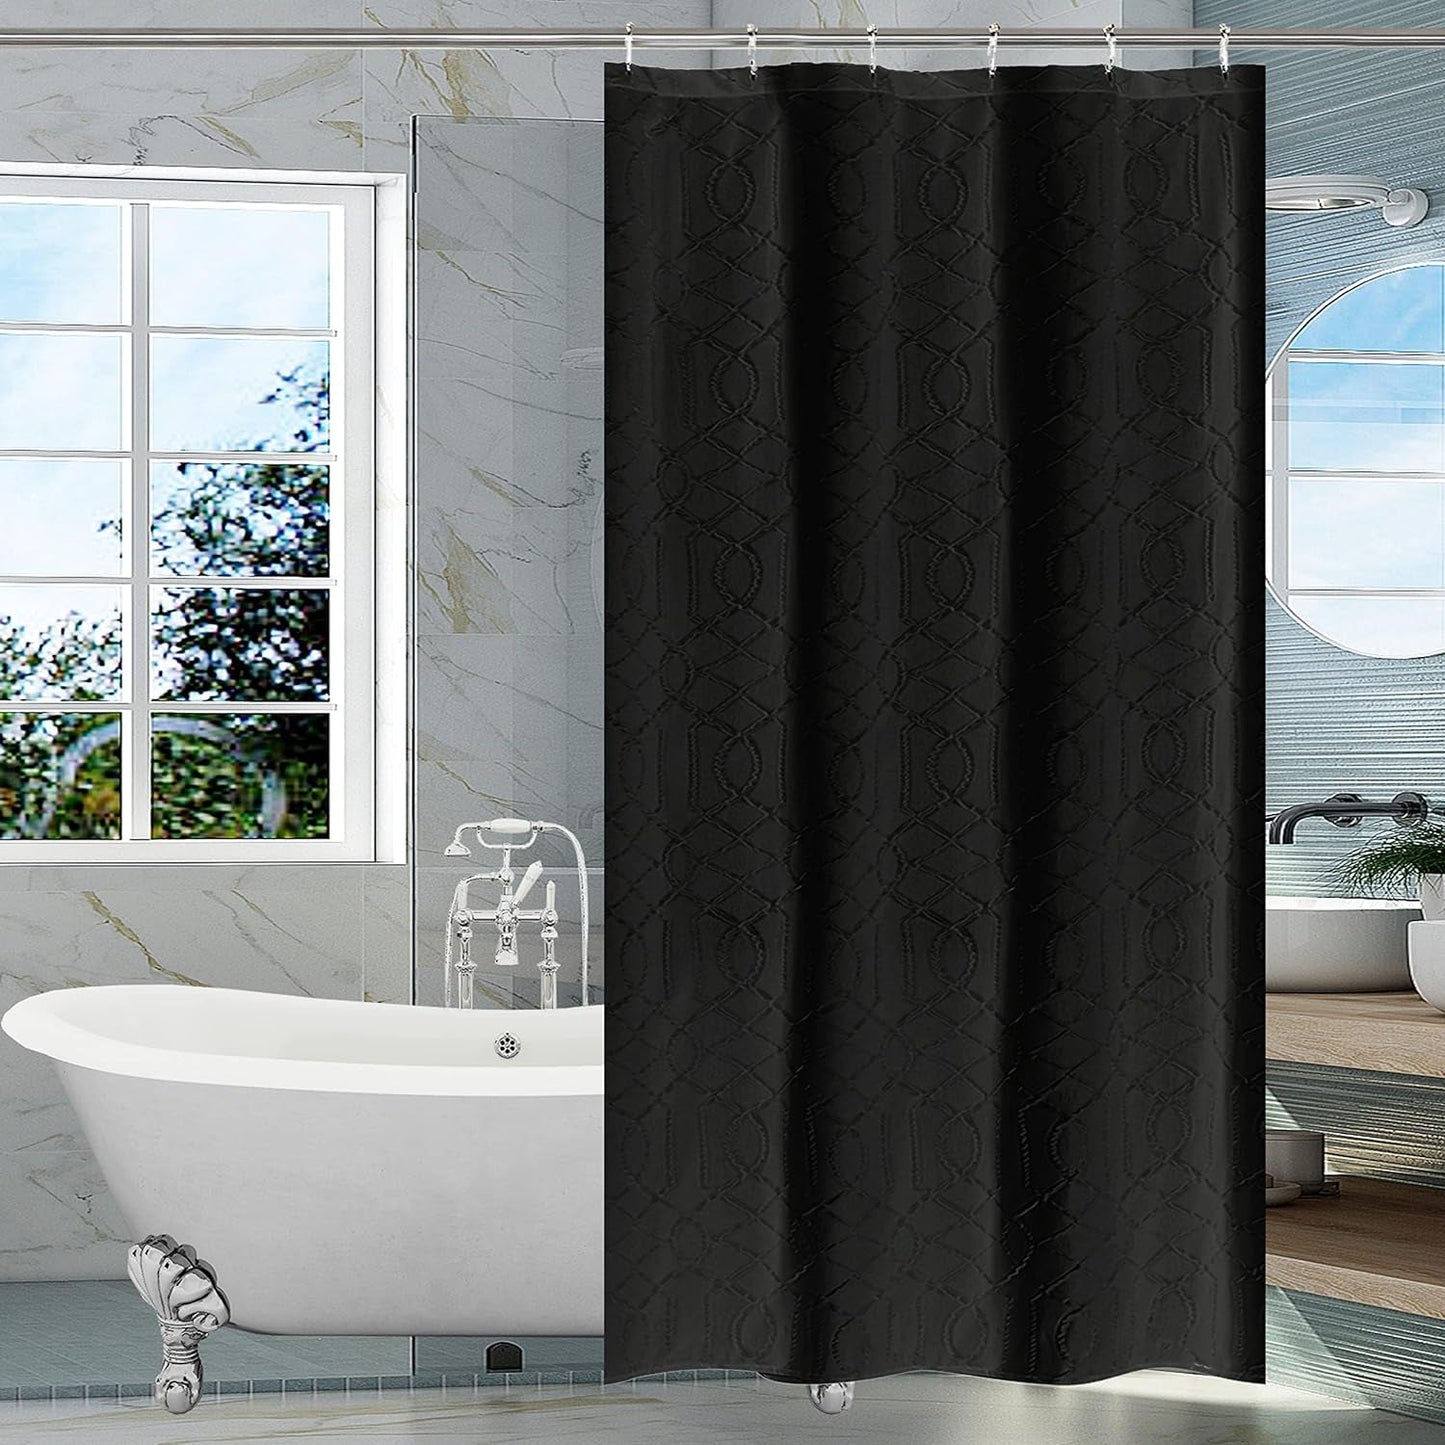 OWENIE White Shower Curtain for Bathroom, 3D Embossed Geometric Polyester White Water-Proof Fabric Shower Curtains, Modern Luxury Elegant Innovative Design Hotel Style, 72 X 72 Inch